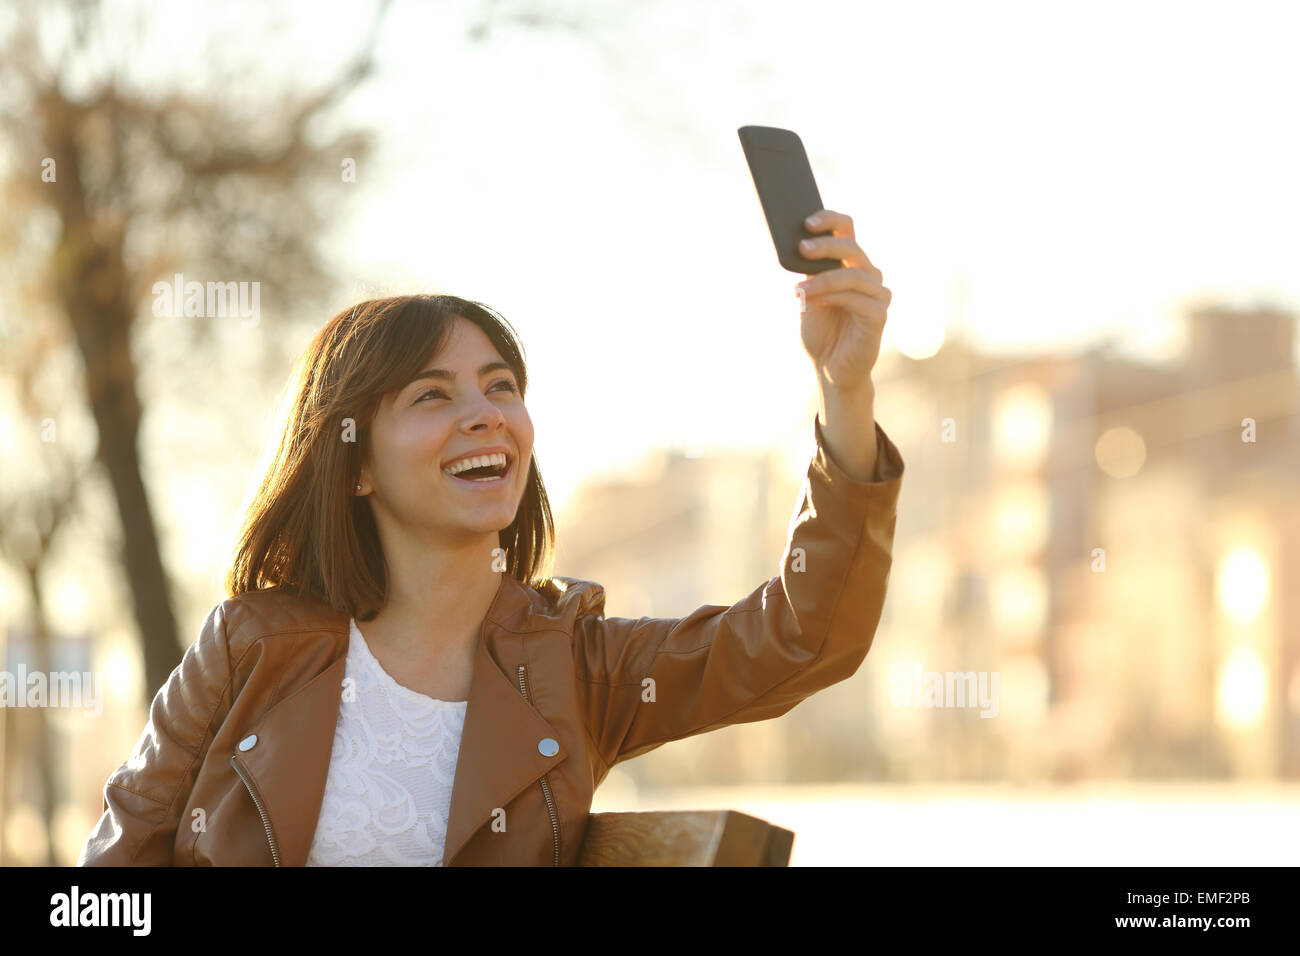 Woman taking selfie photo with a smarphone in winter sitting in a bench in a park Stock Photo